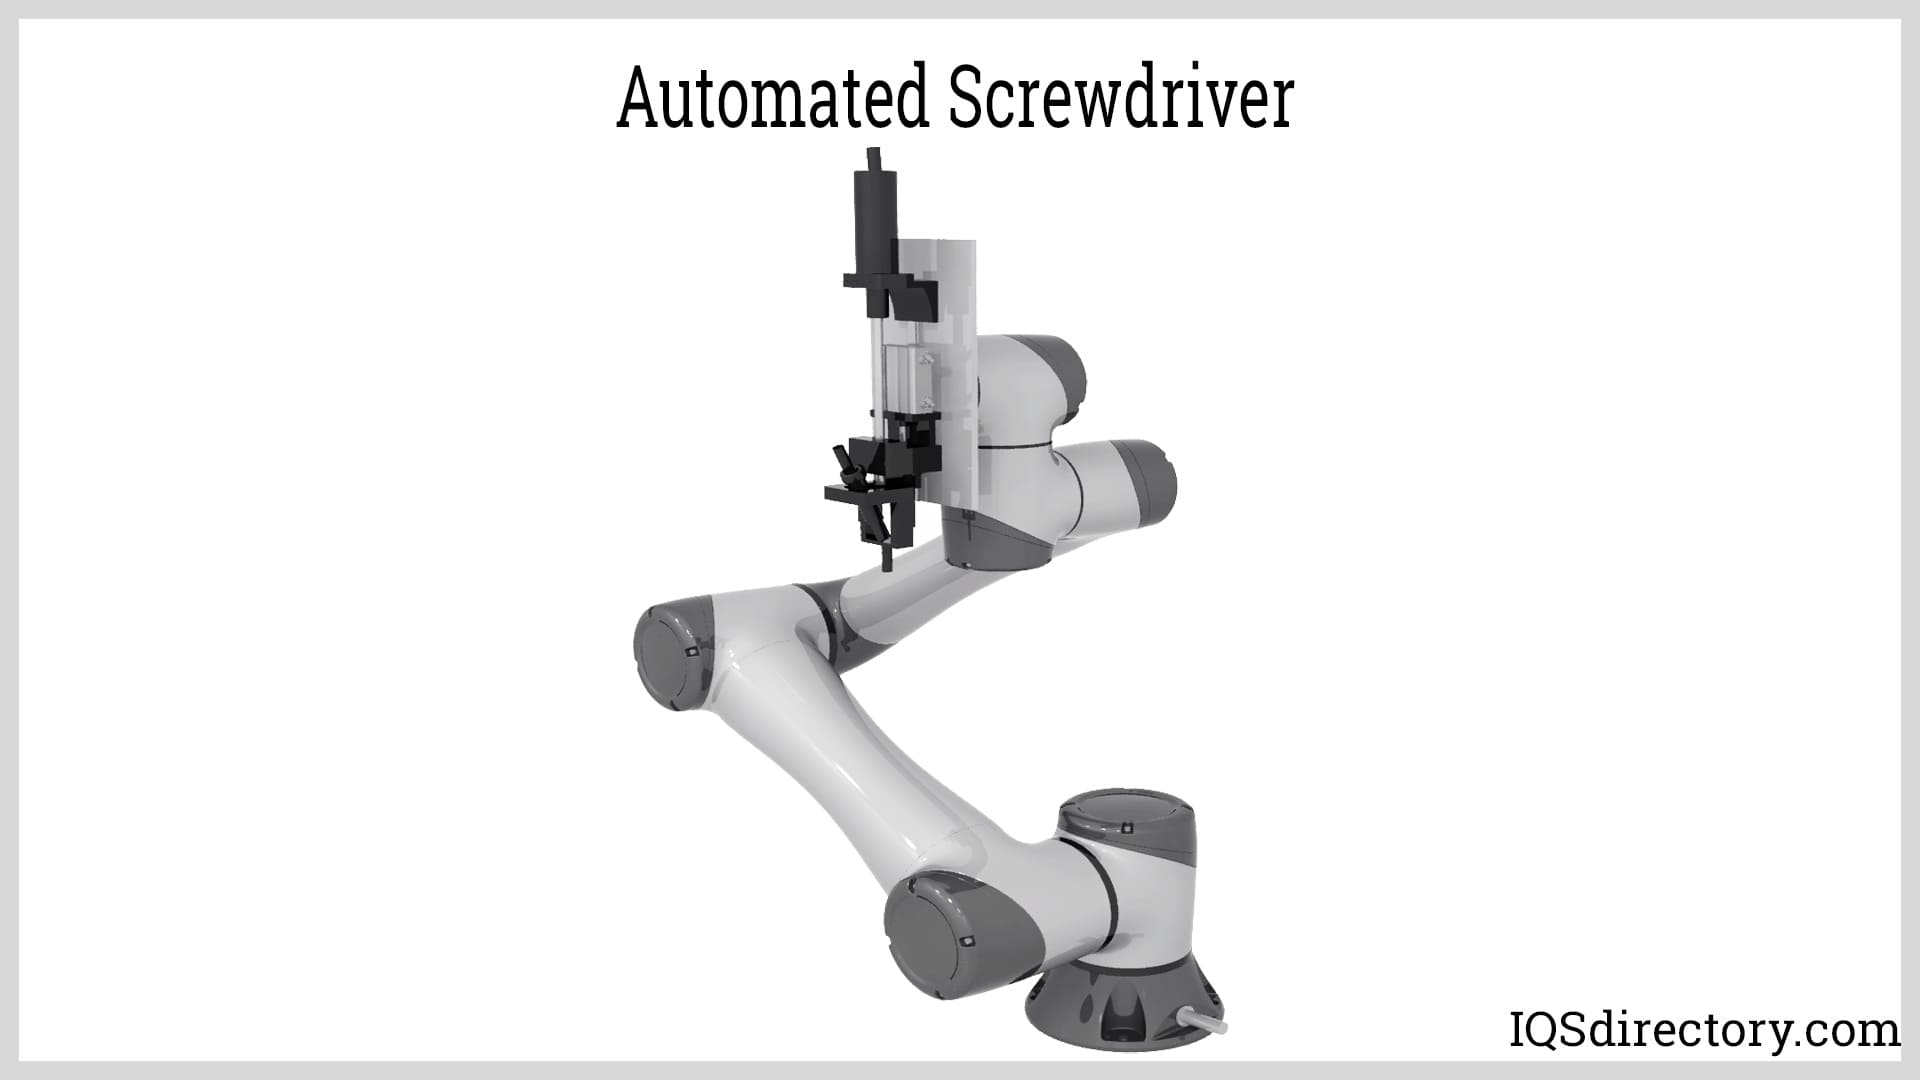 Automated Screwdriver